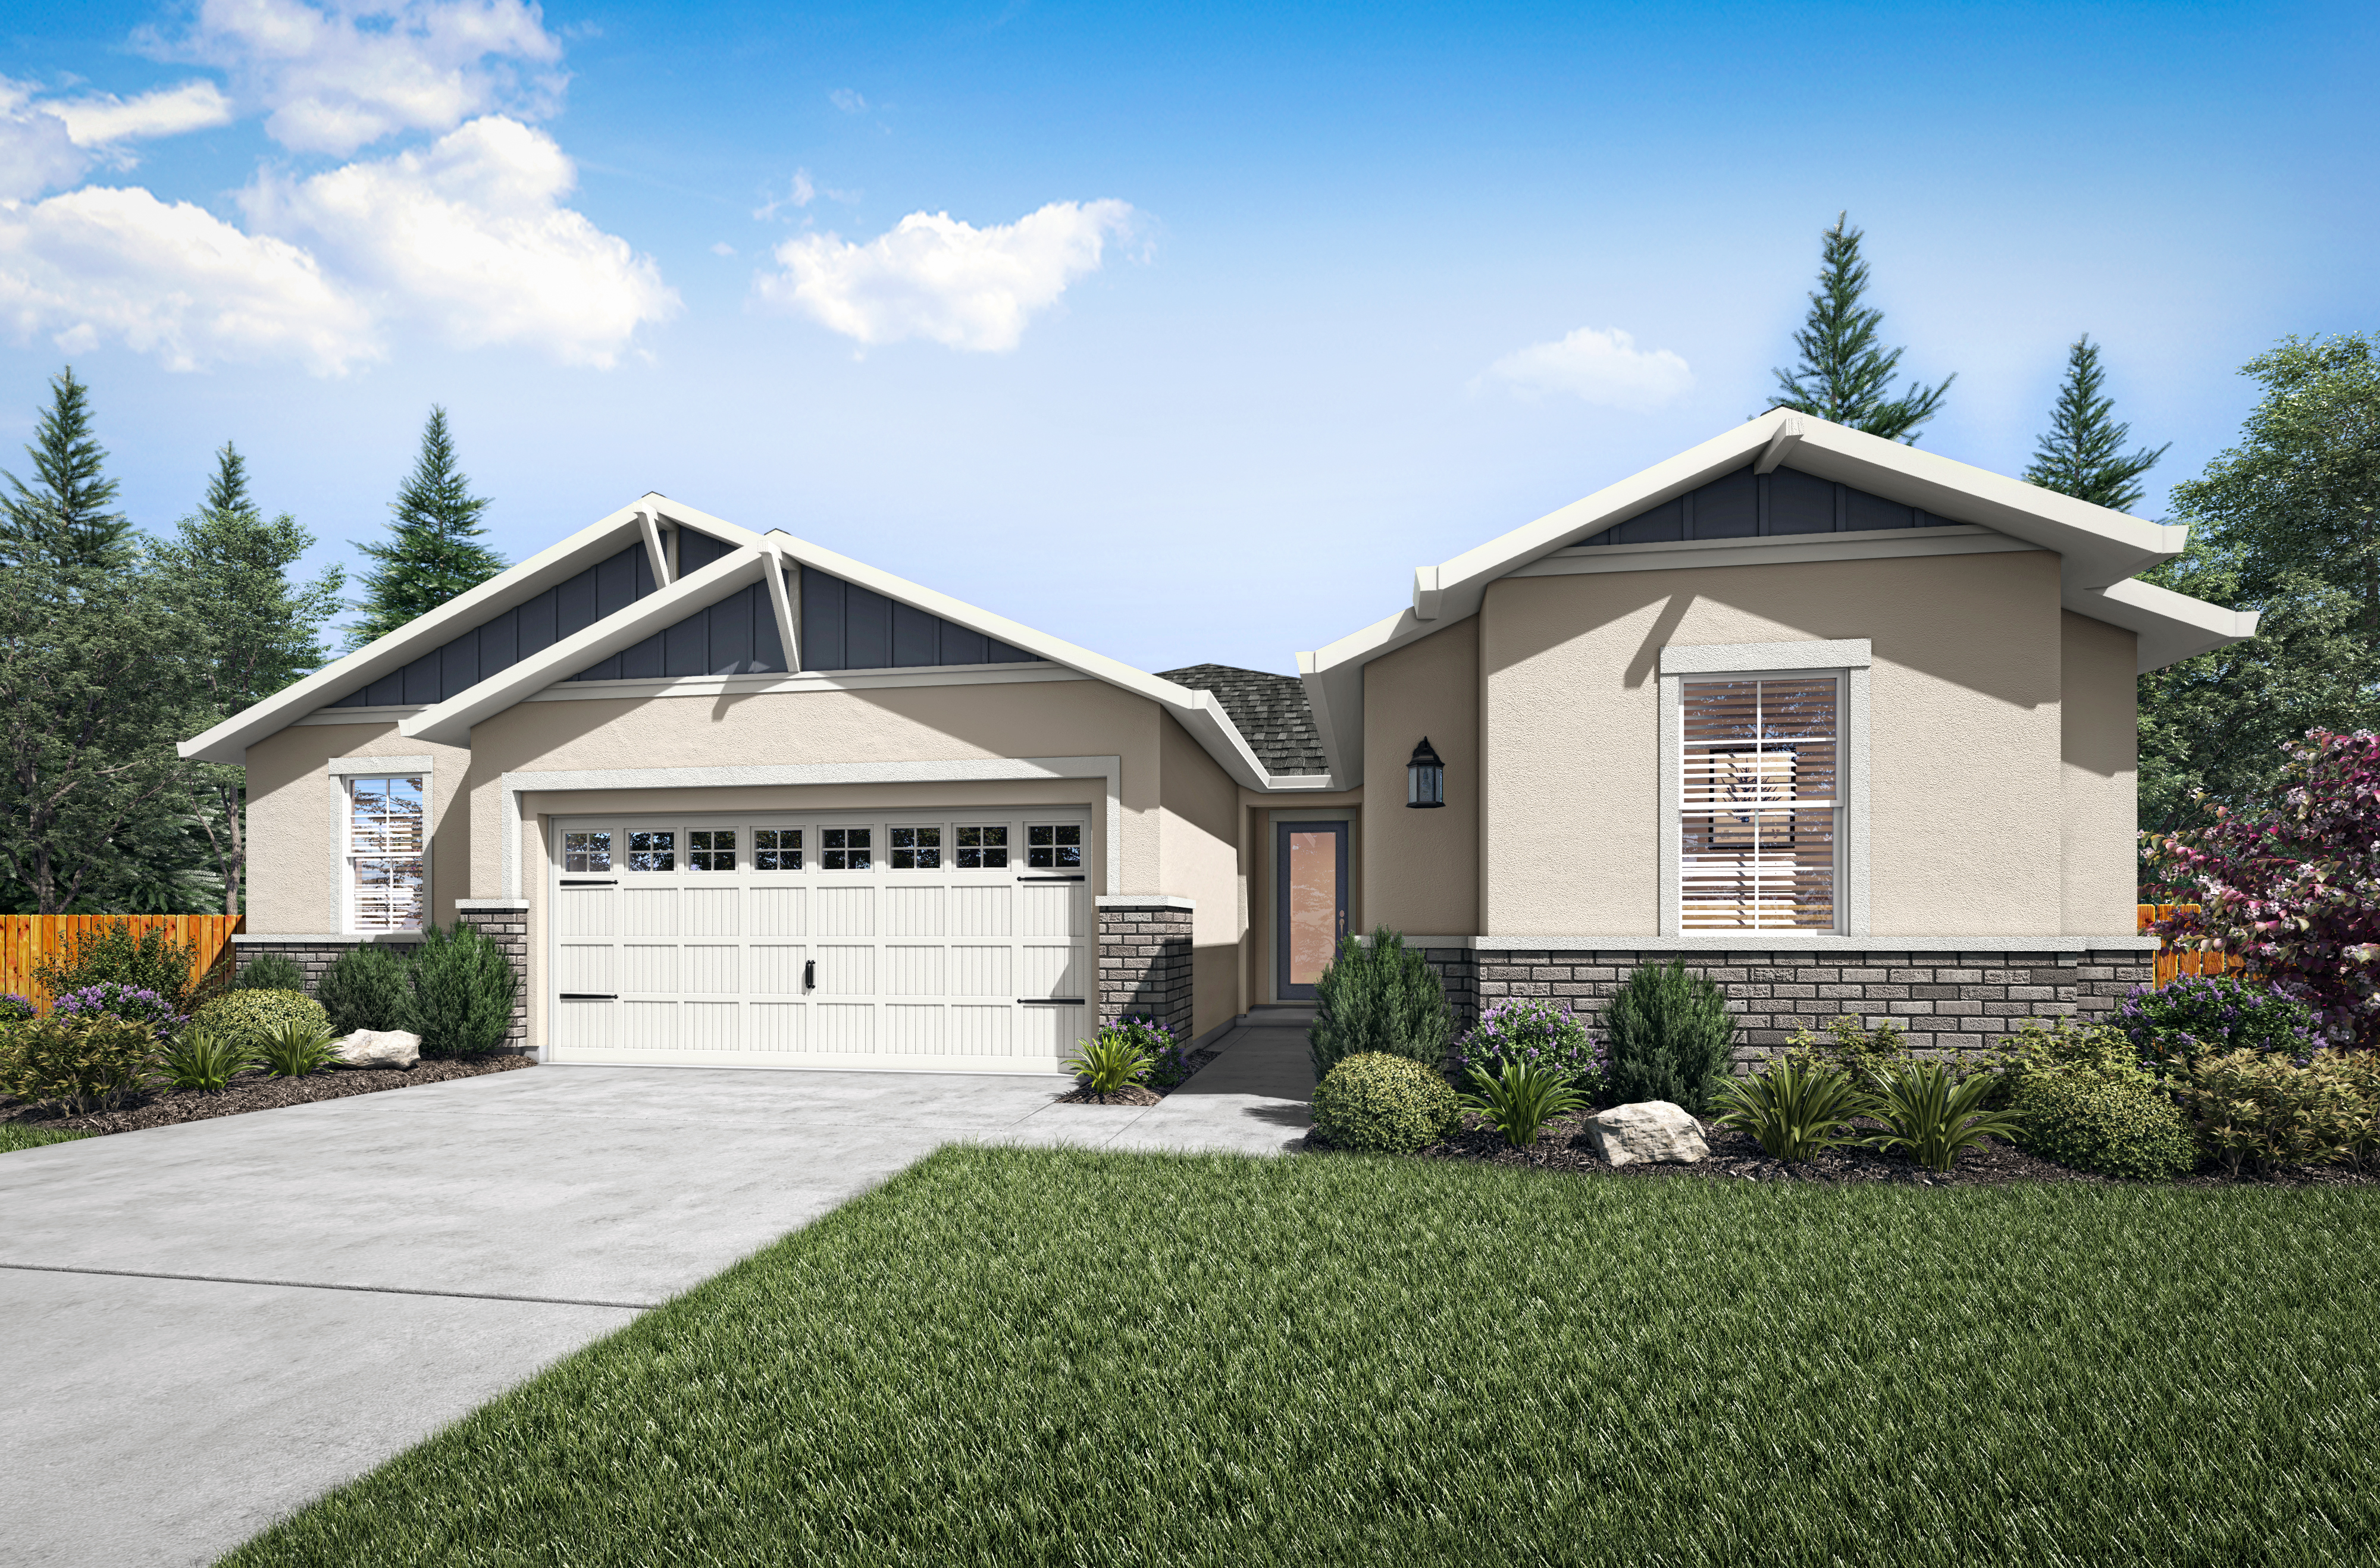 The Walker plan is a stunning, one-story home by Terrata Homes at Summit at Liberty.